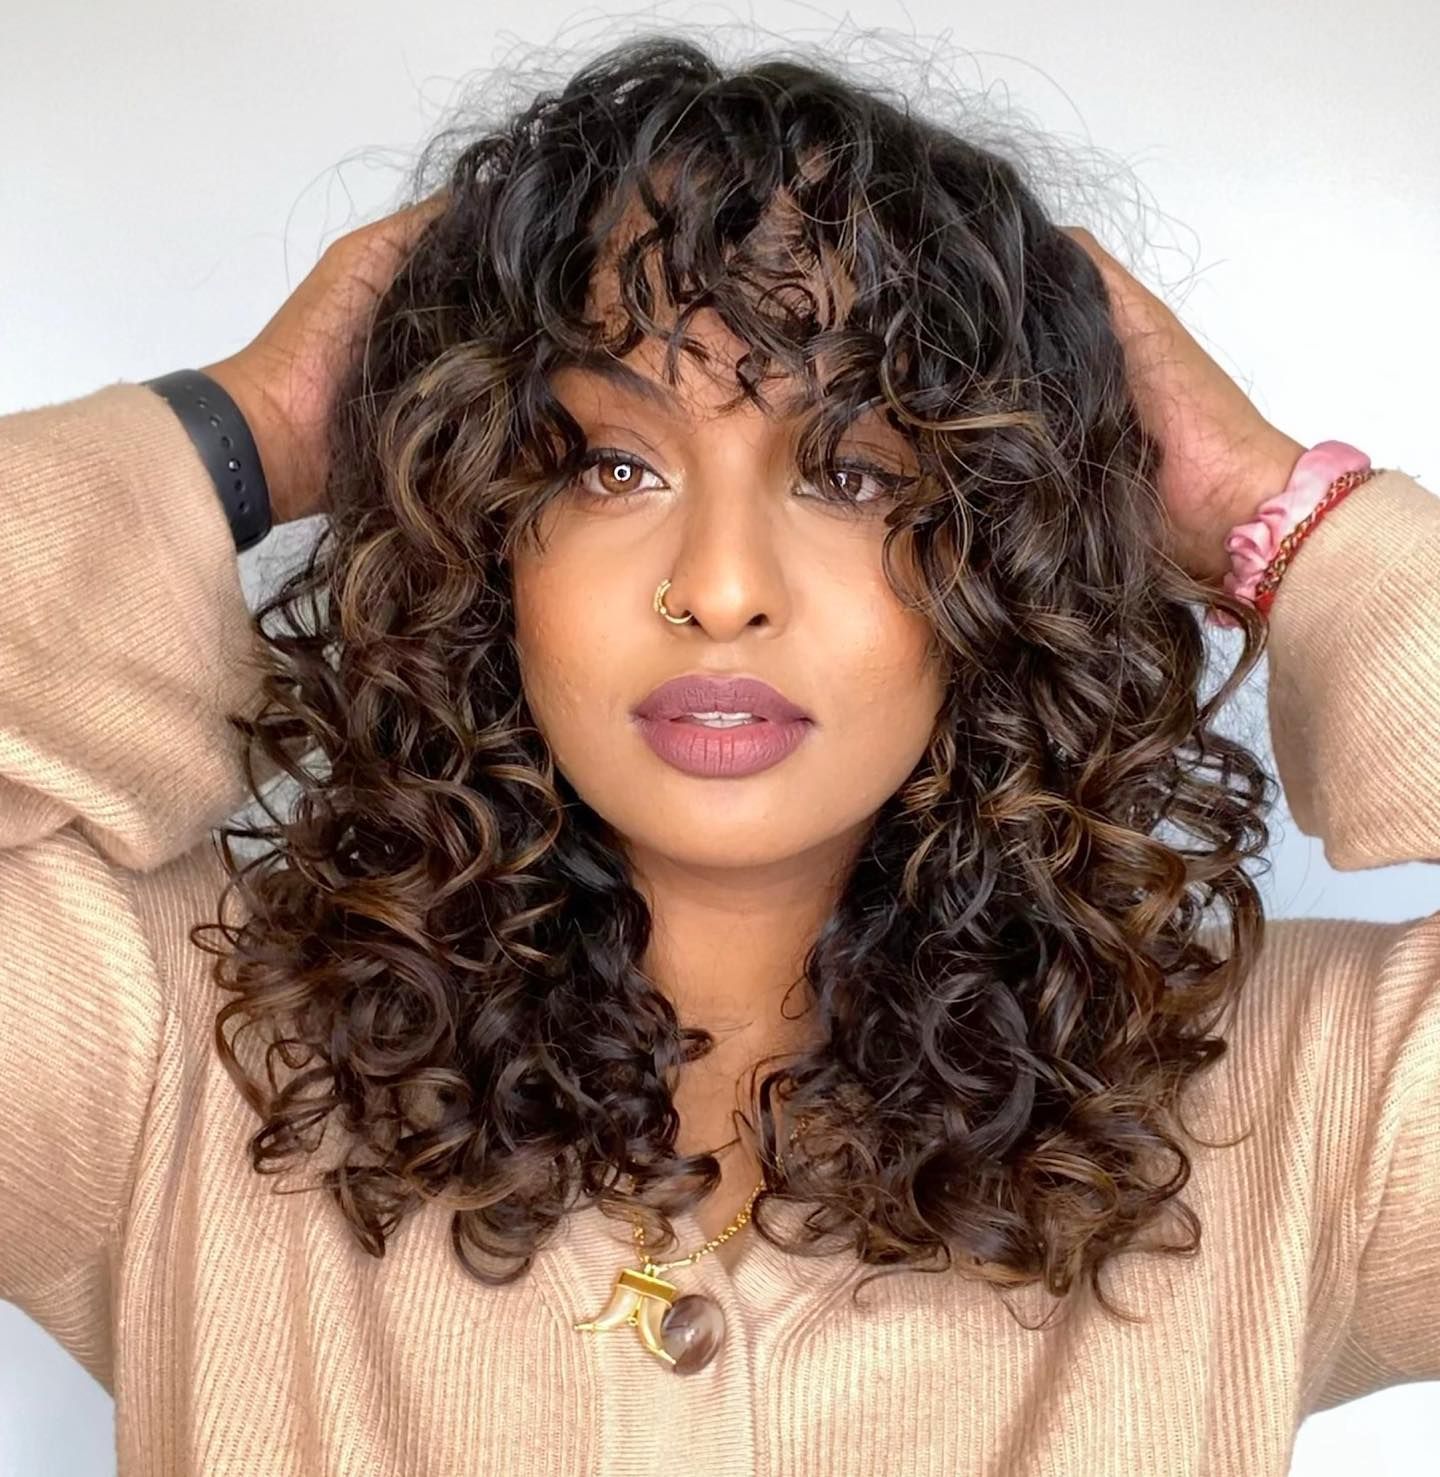 16 Top Curtain Bangs On Curly Hair Looks In 2023 – Zohna Inside 2018 Thick Curtain Bangs (View 8 of 20)